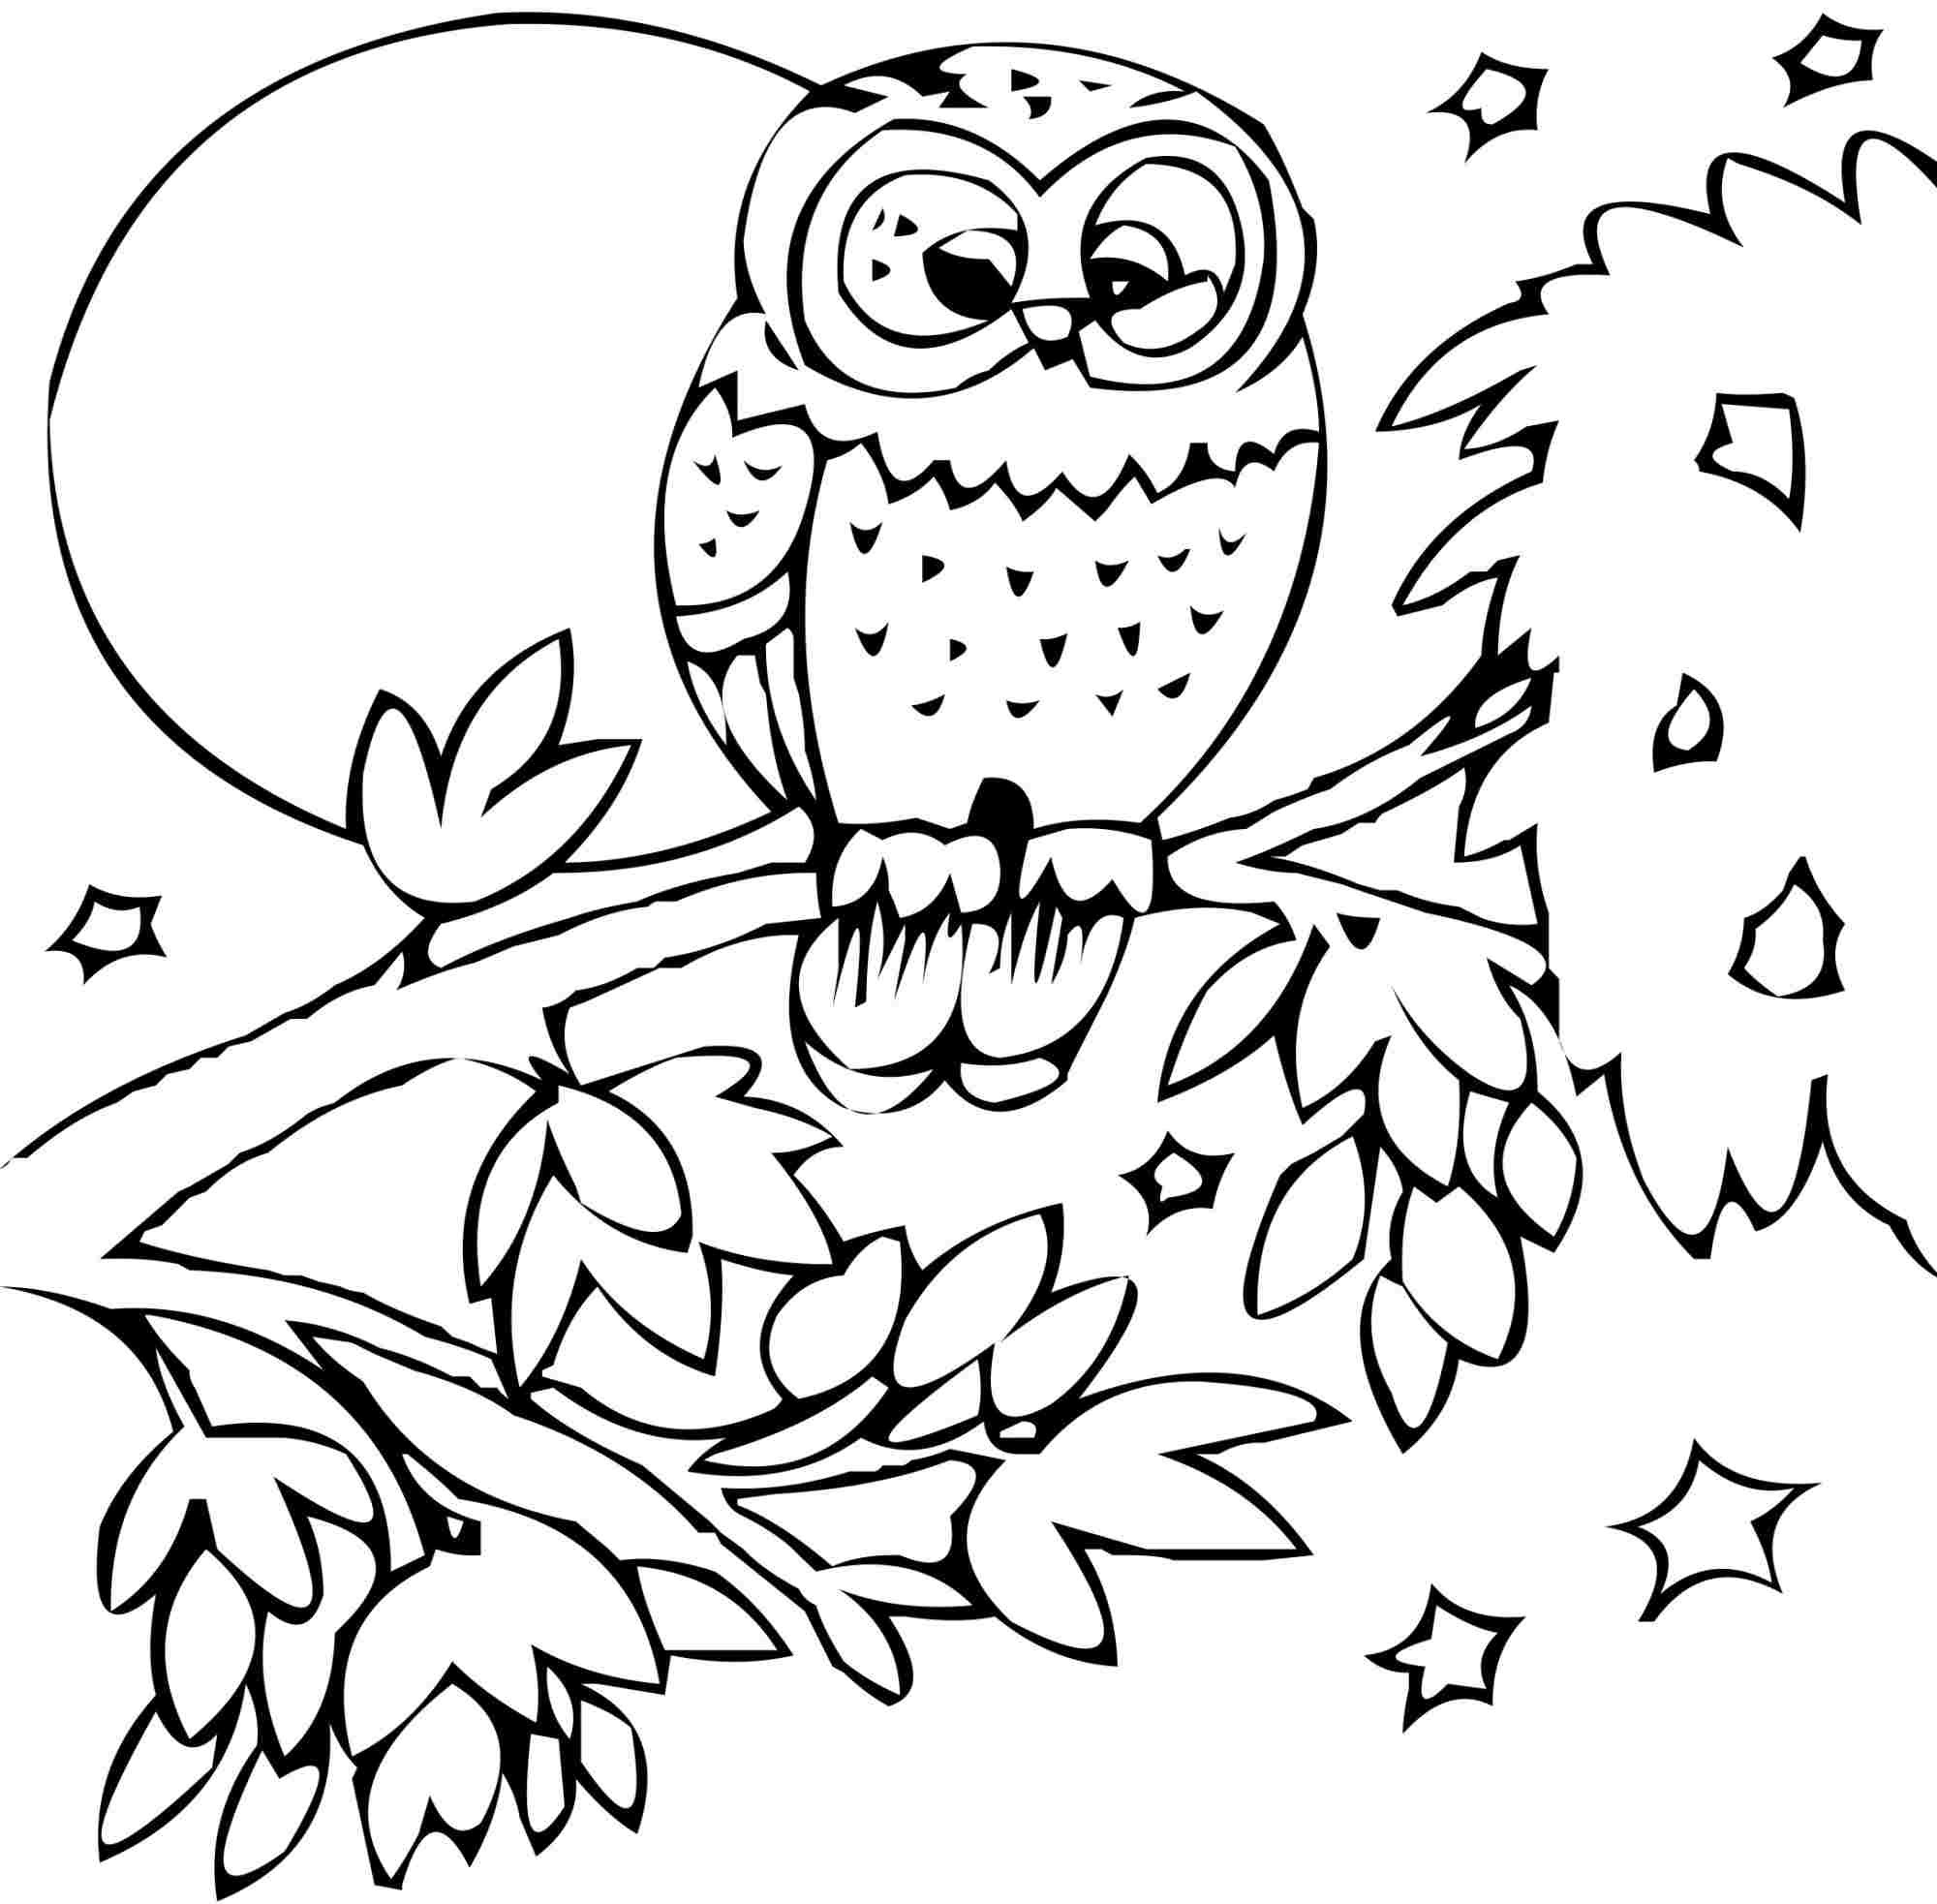 Free Printable Animal Coloring Pages
 Free Coloring Pages Animals For Children Image 4